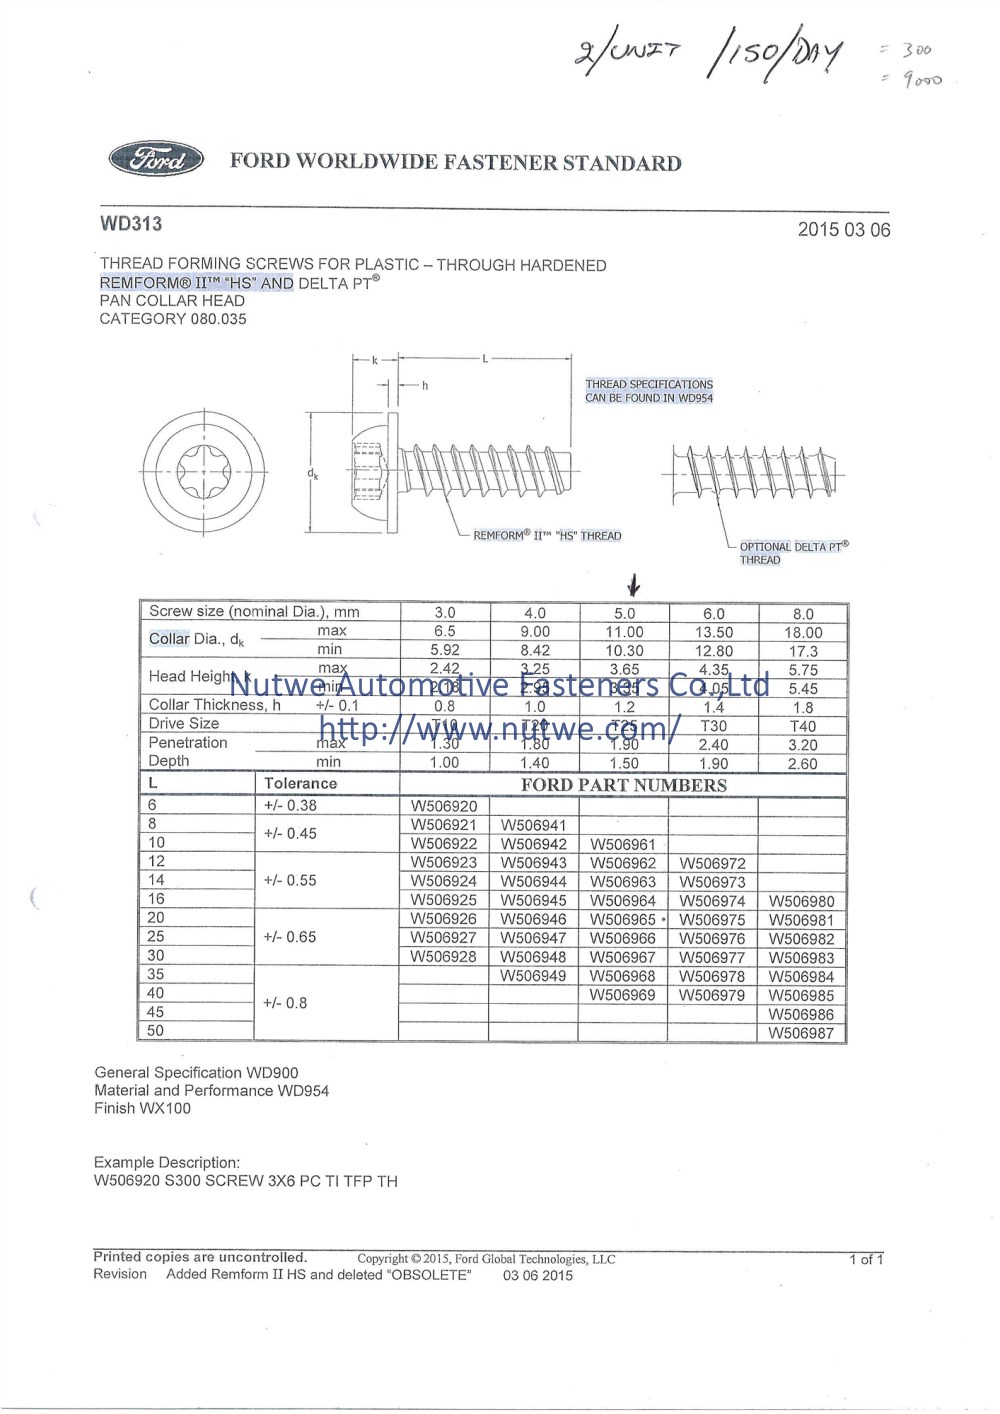 Ford WD313 Thread Forming Screws Engineer Drawing and Technical Data Sheet